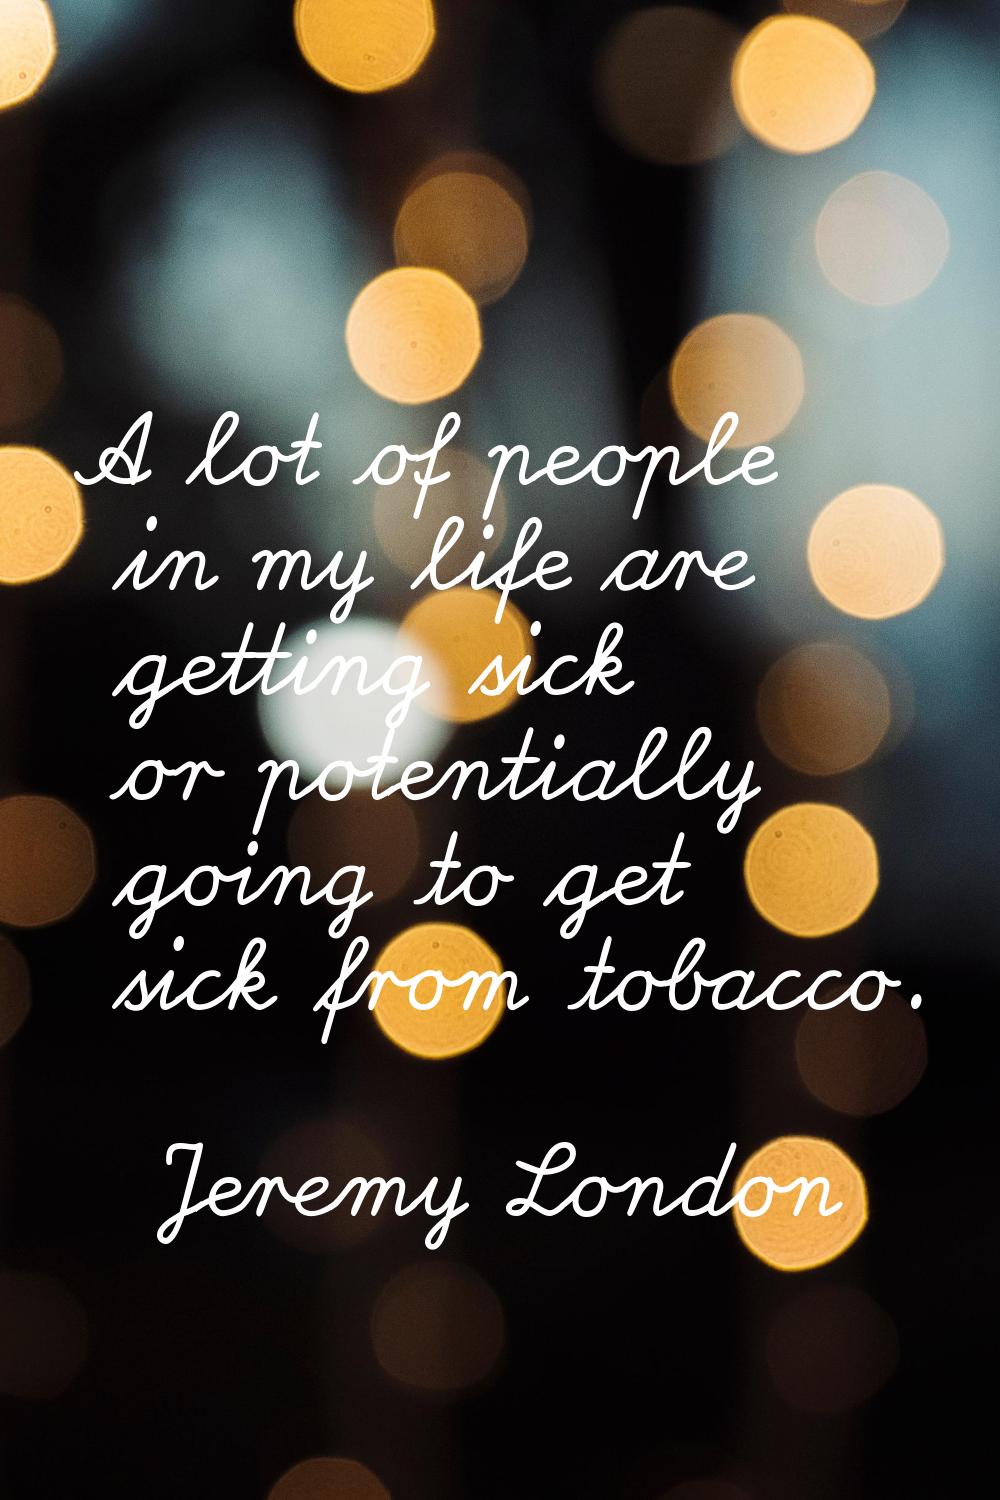 A lot of people in my life are getting sick or potentially going to get sick from tobacco.